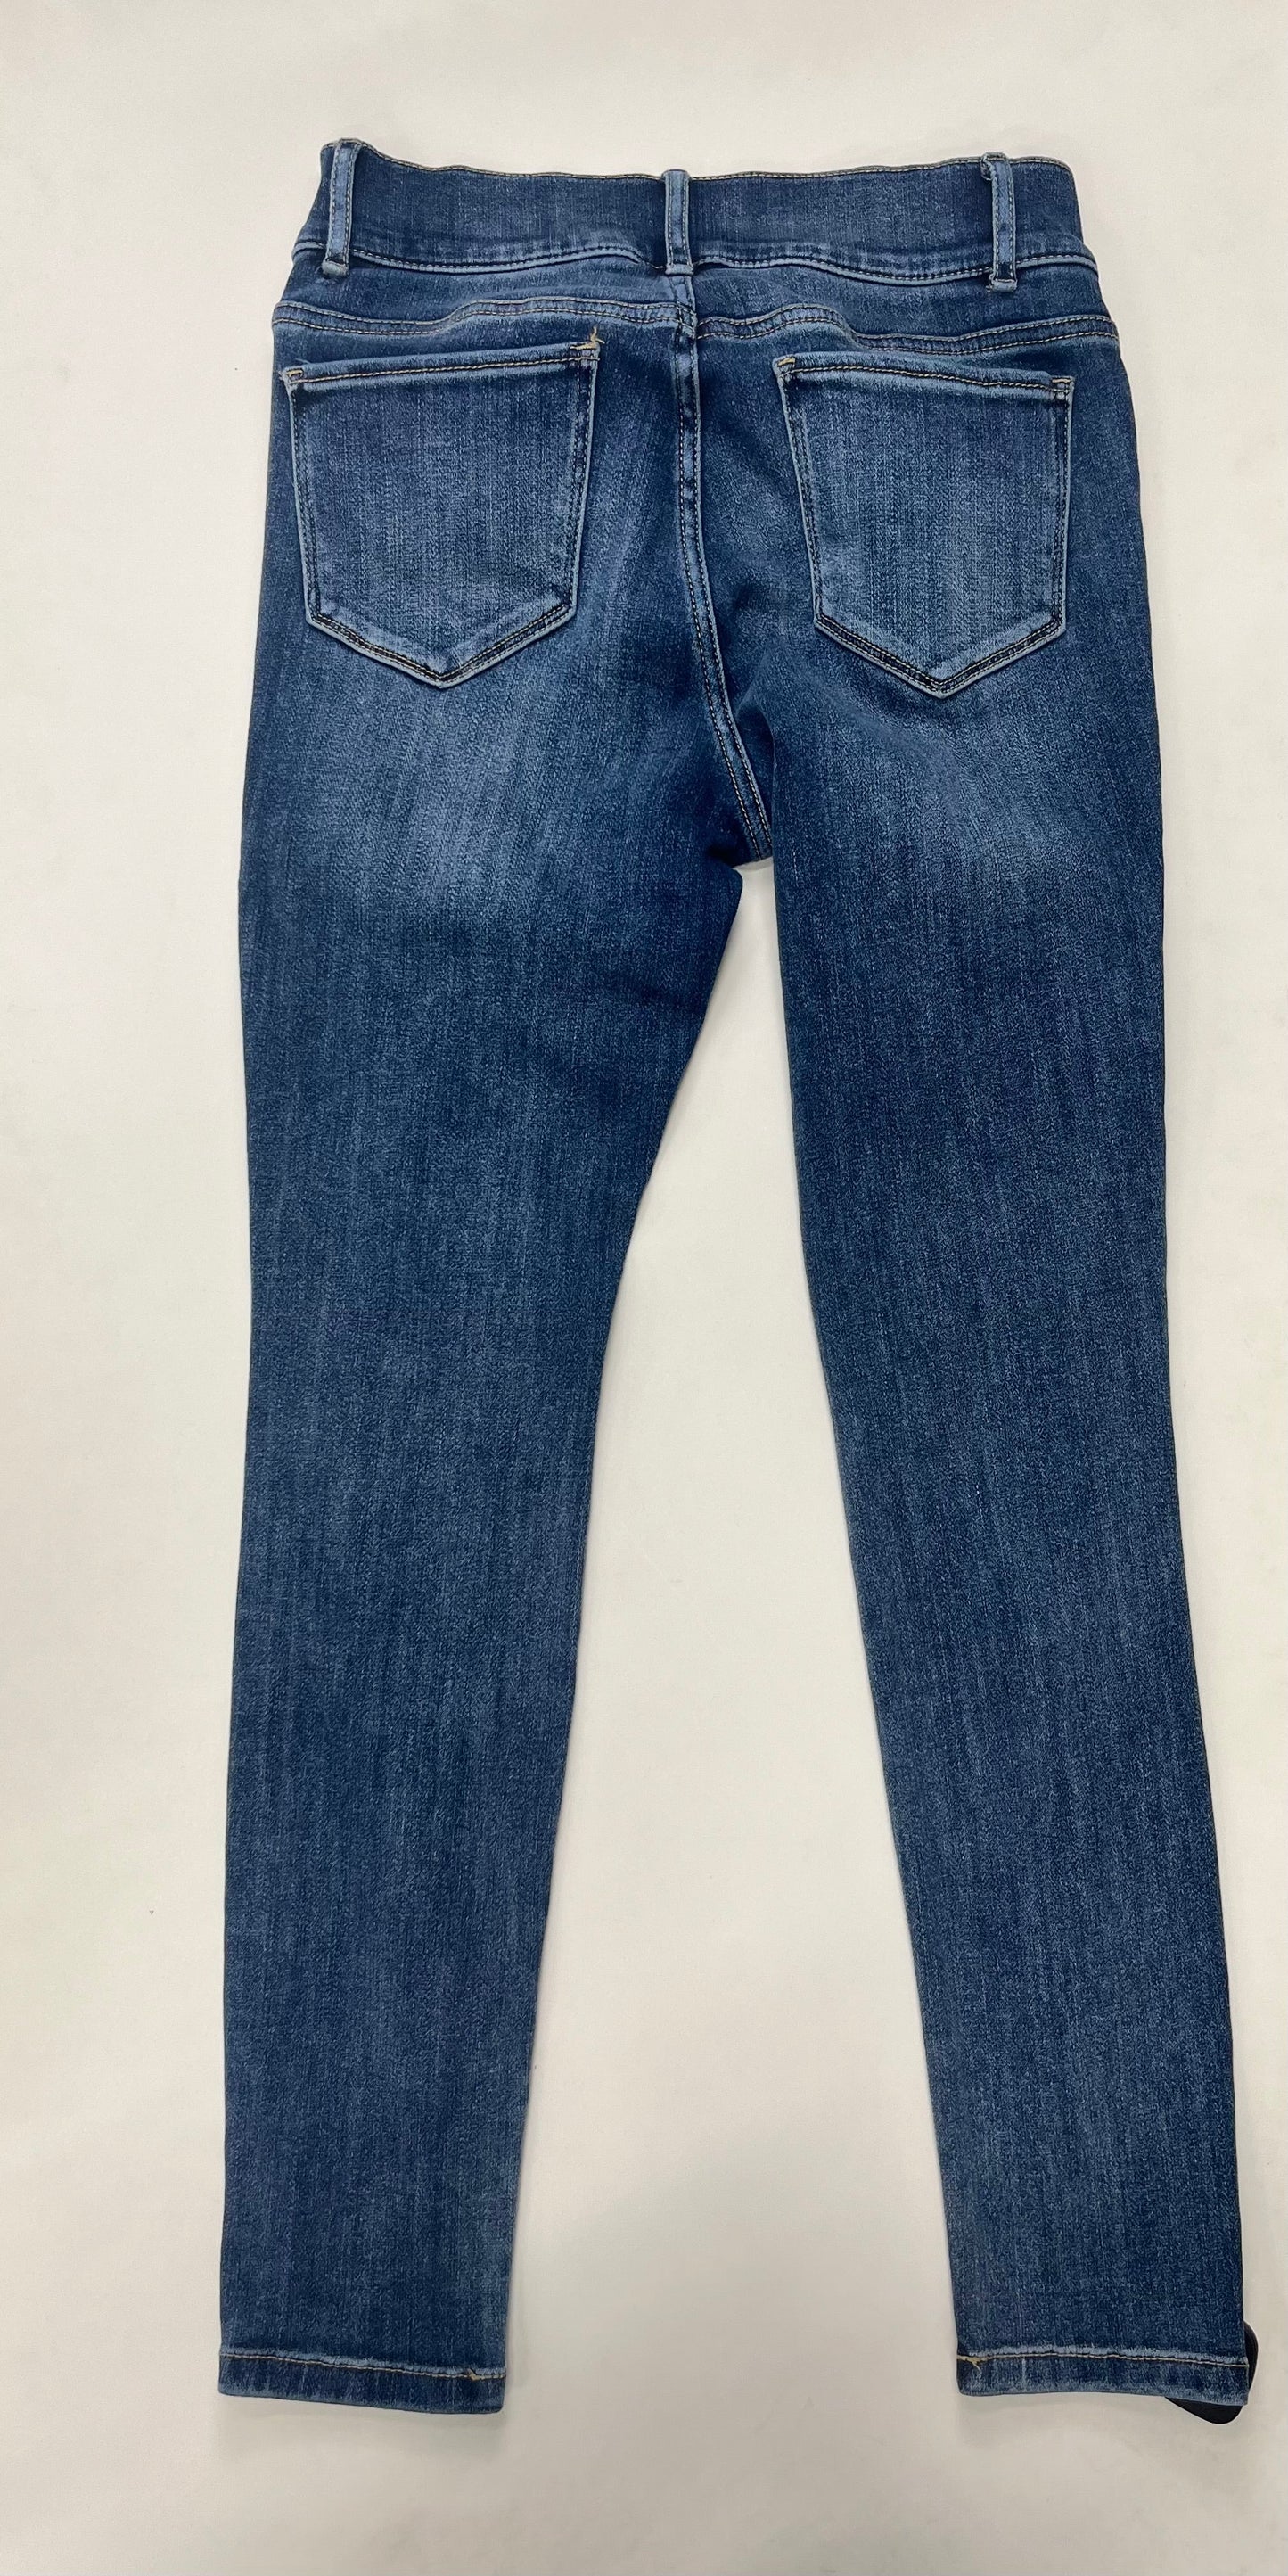 Denim Jeans Skinny New York And Co, Size 8